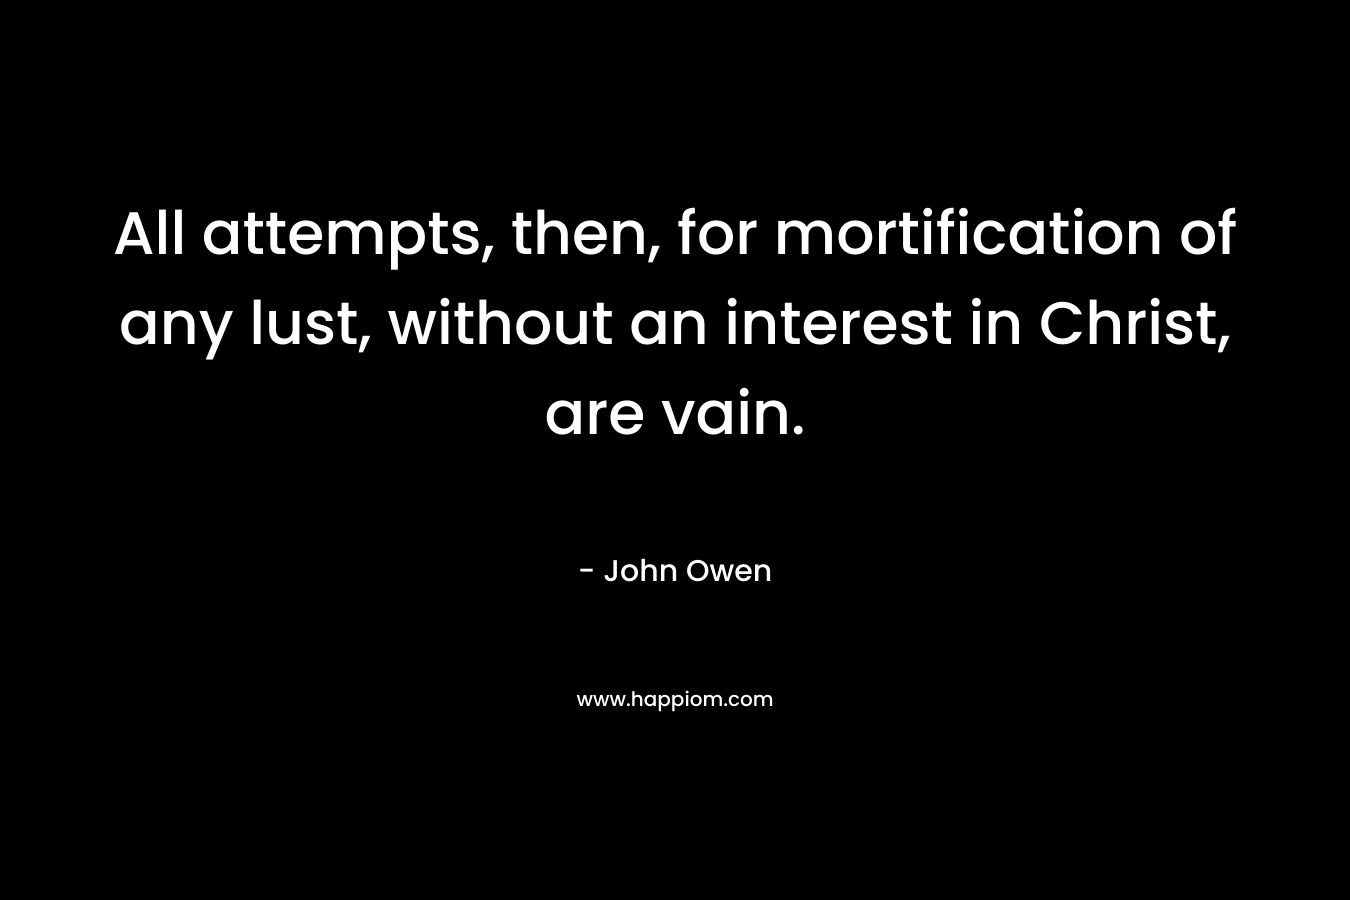 All attempts, then, for mortification of any lust, without an interest in Christ, are vain. – John Owen